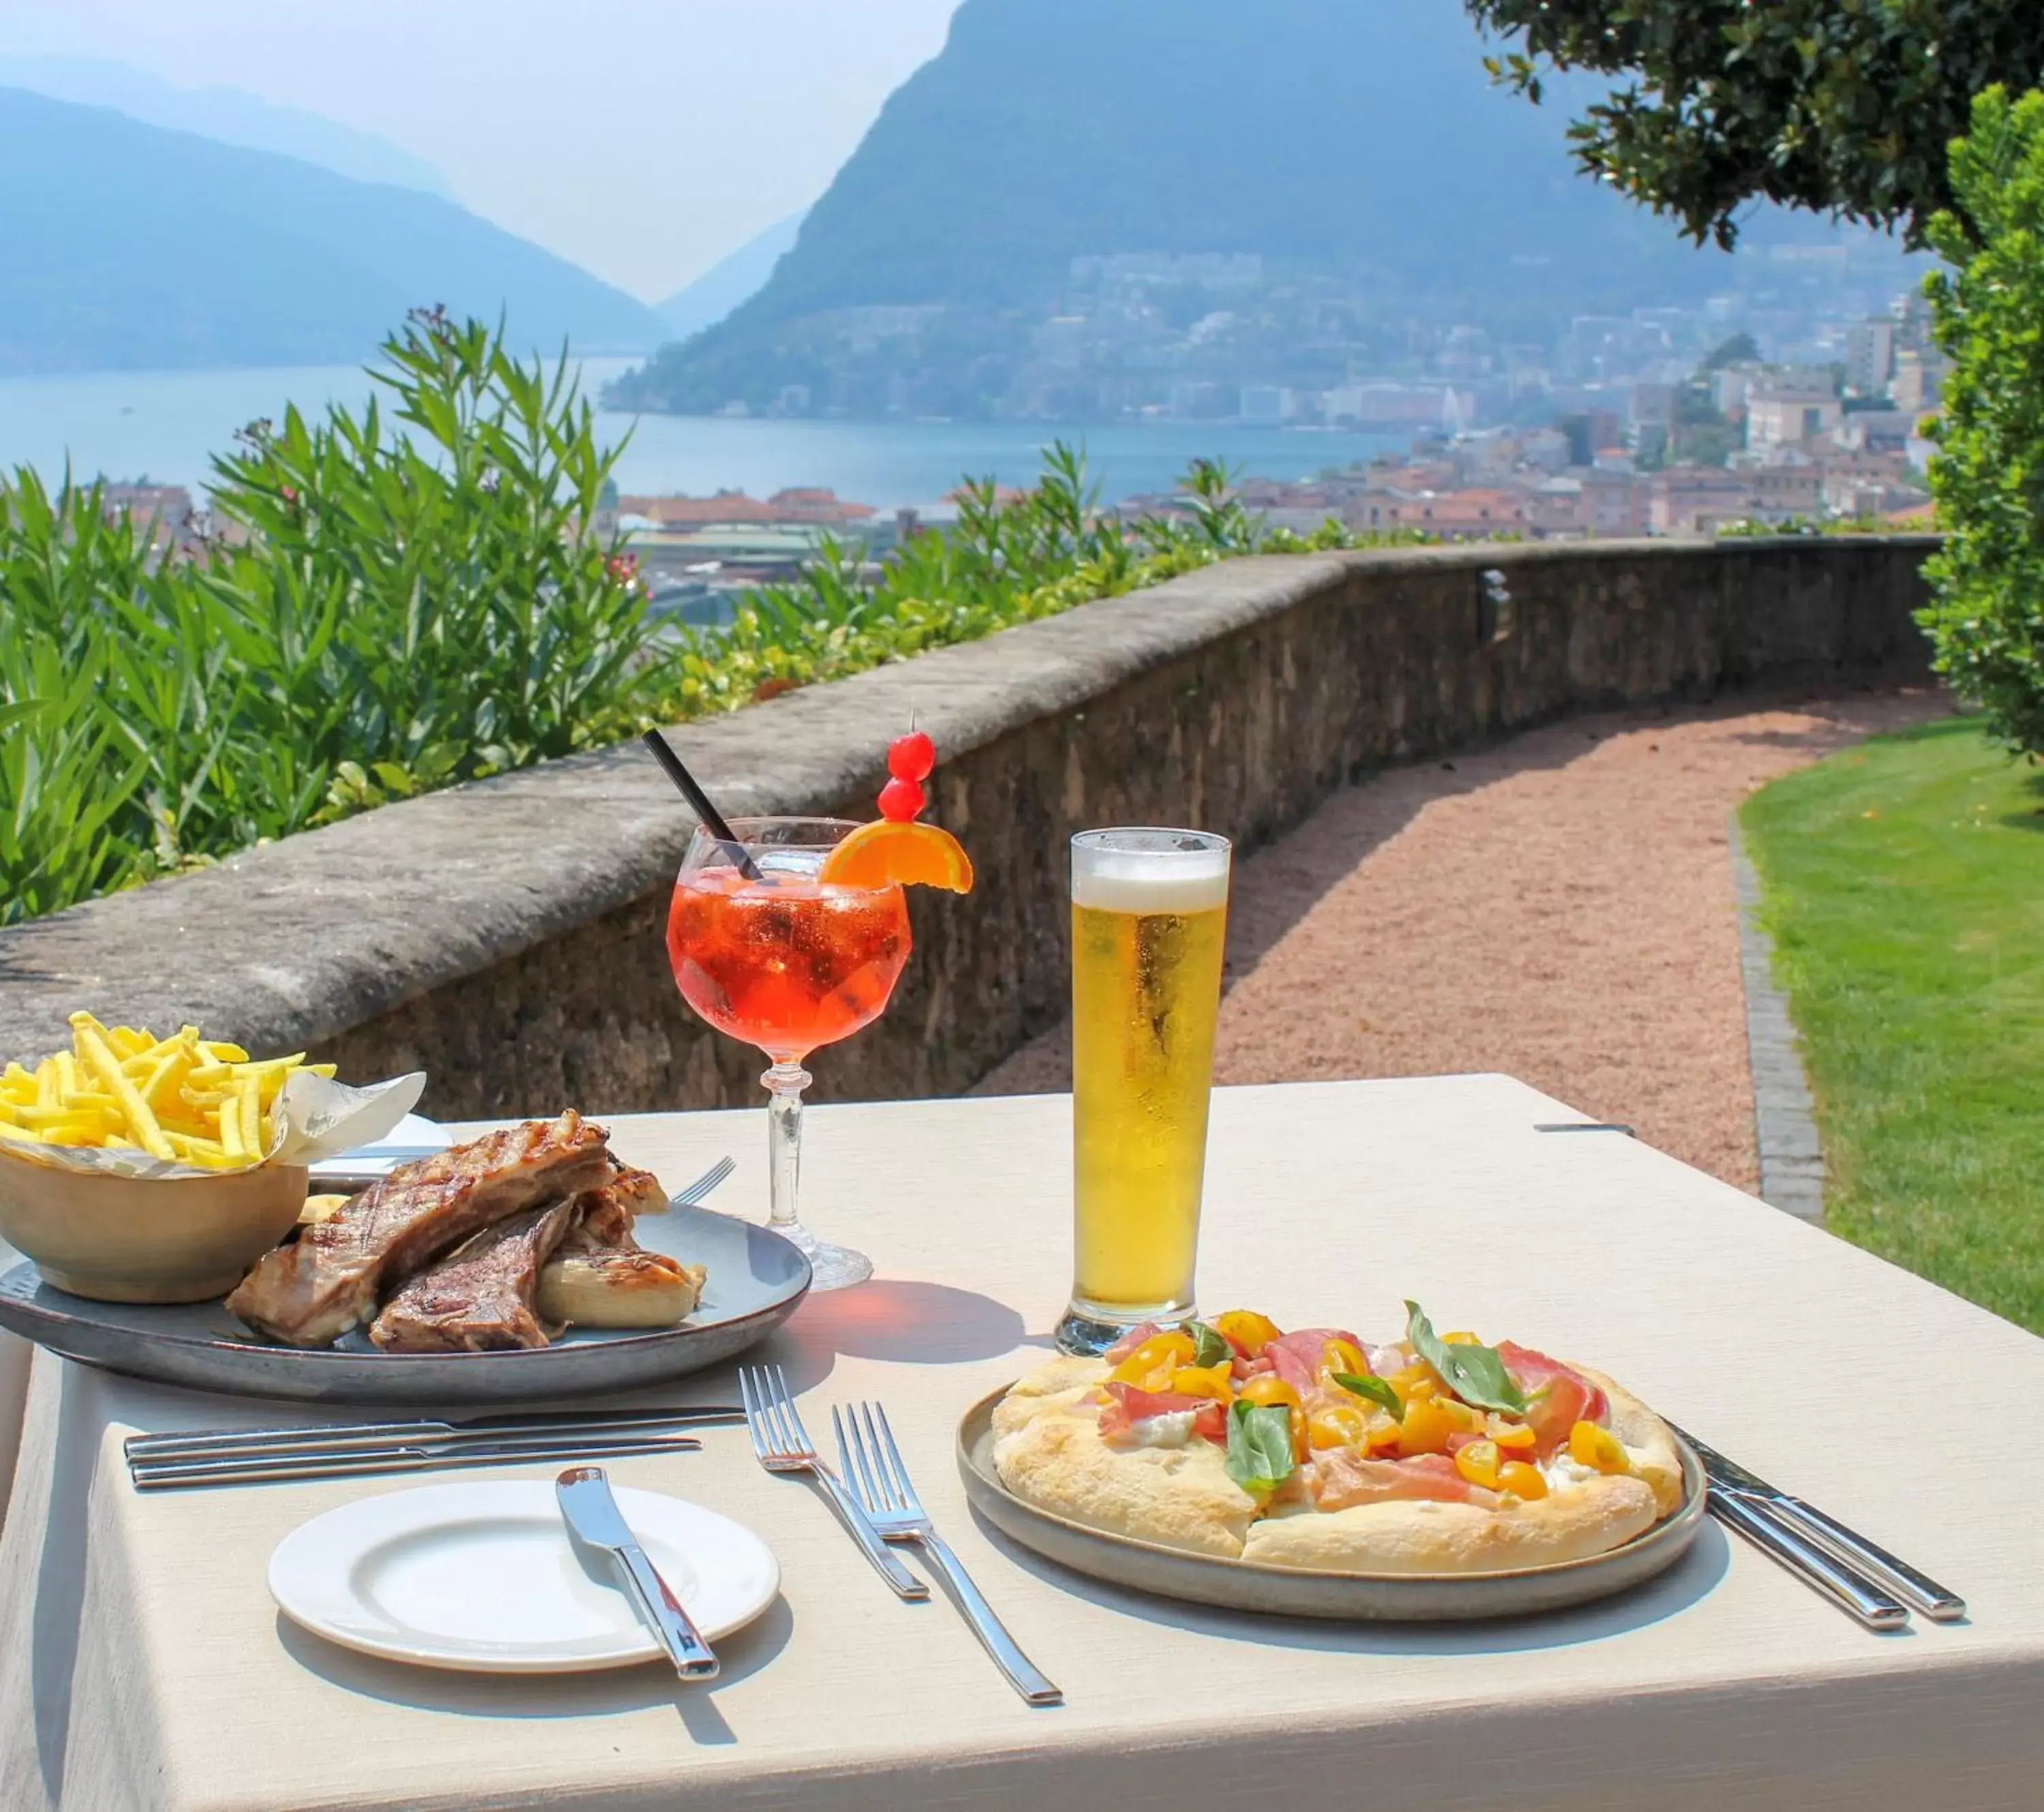 Food and drinks in Villa Sassa Hotel, Residence & Spa - Ticino Hotels Group